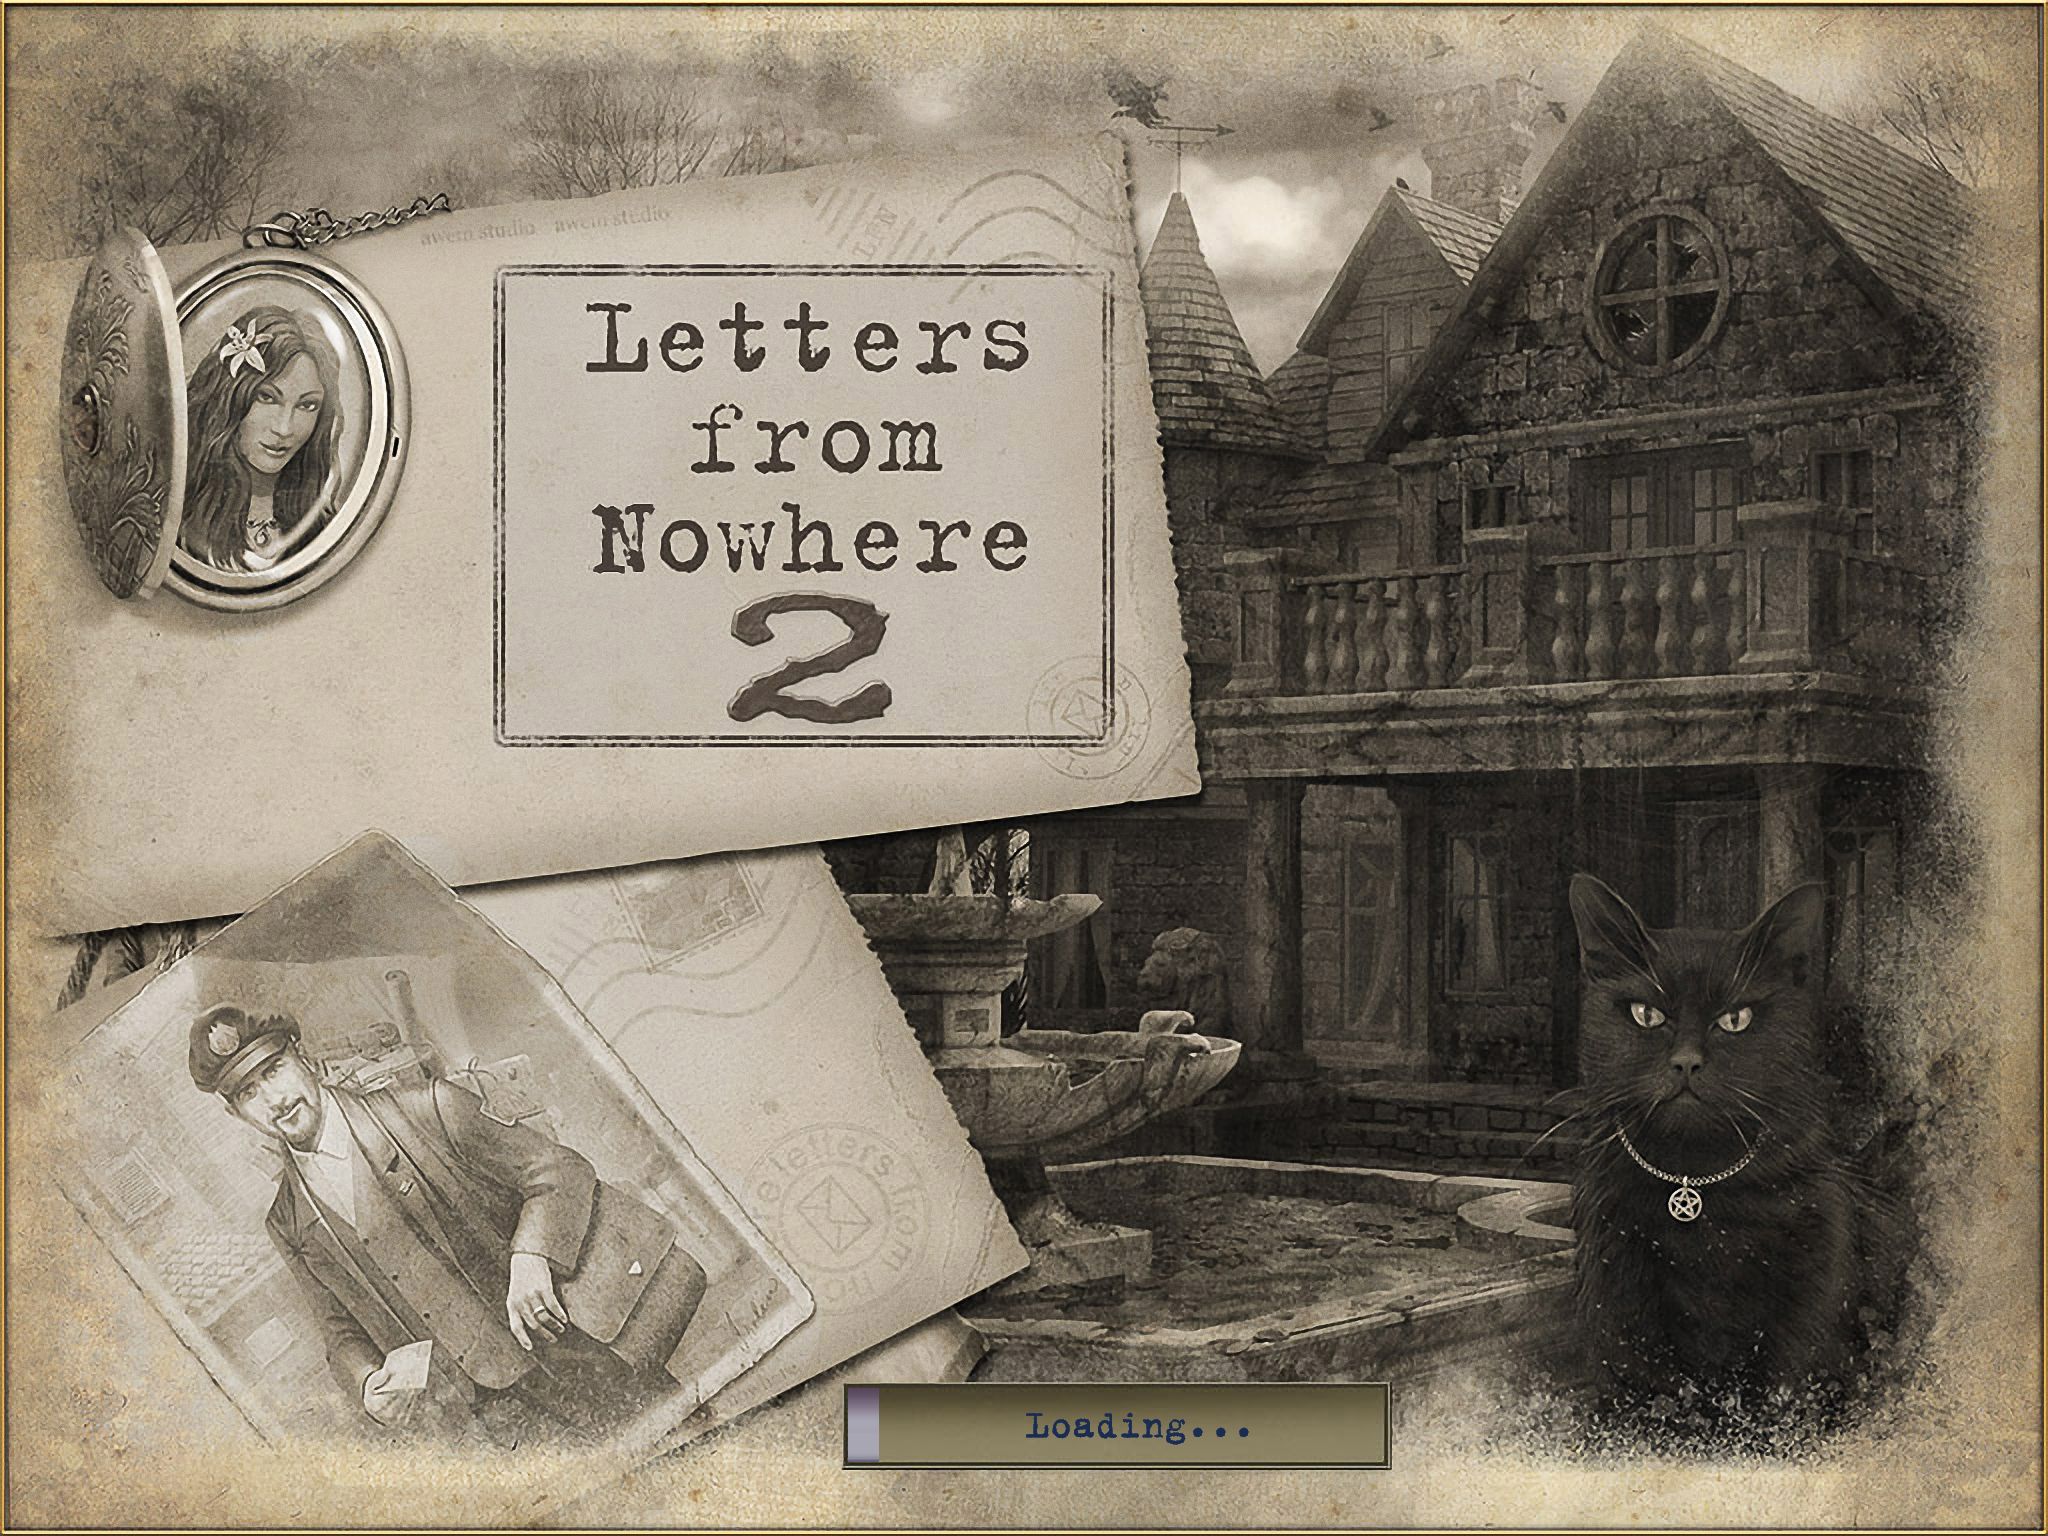 letters-from-nowhere-2-ipad-game-review-geardiary